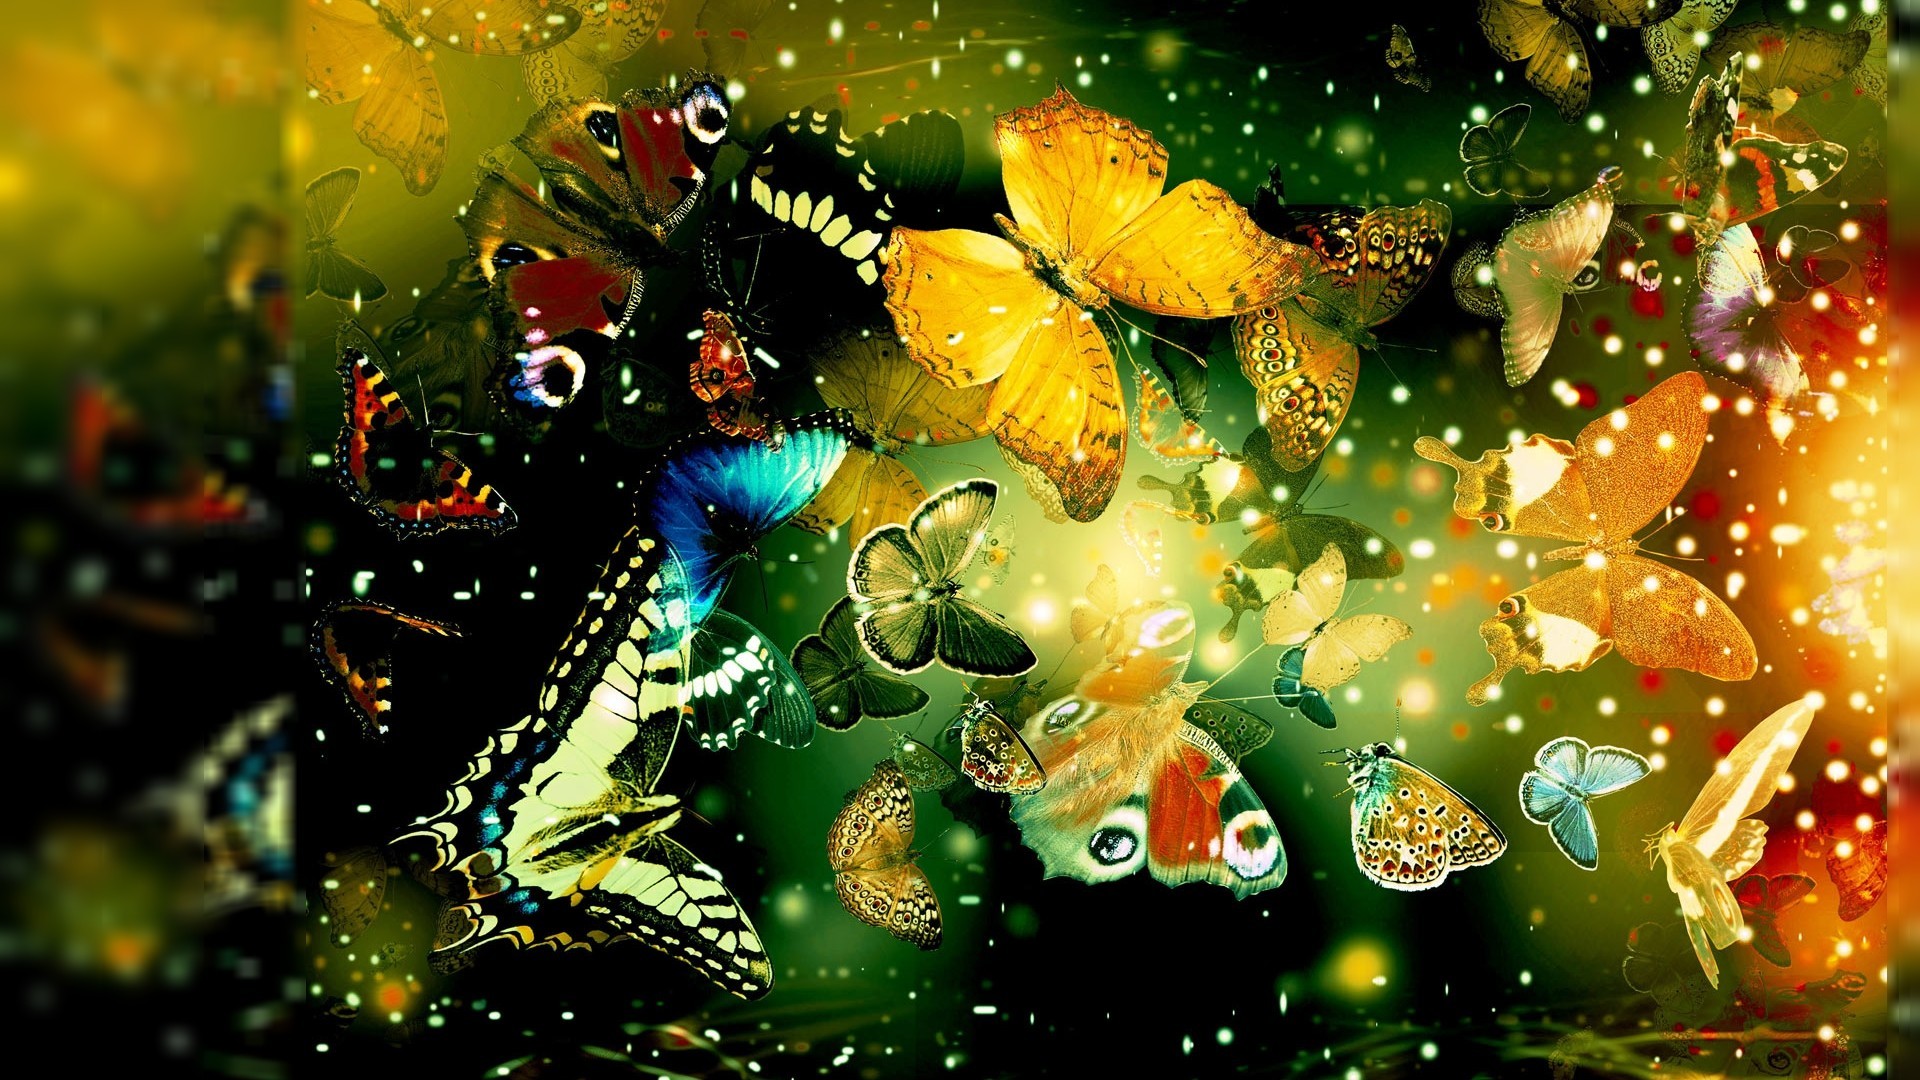 1920x1080 butterfly pictures for desktop background download